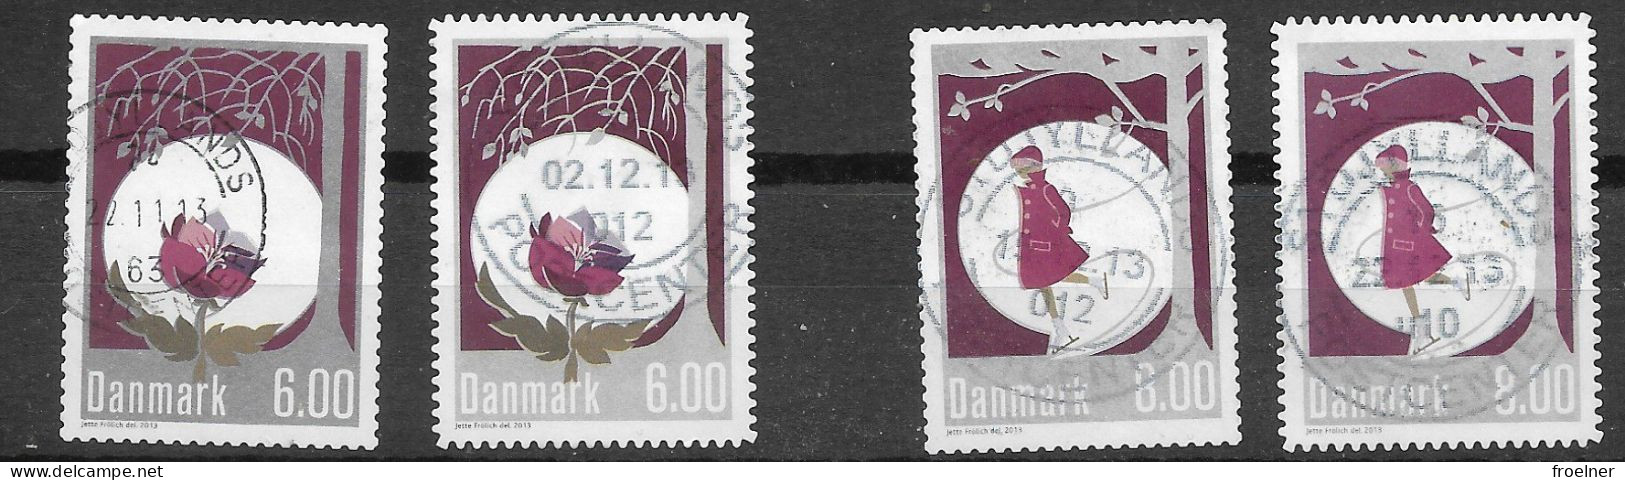 Denmark 2013, MiNr 1758a + C, 1759a + C - Used Stamps